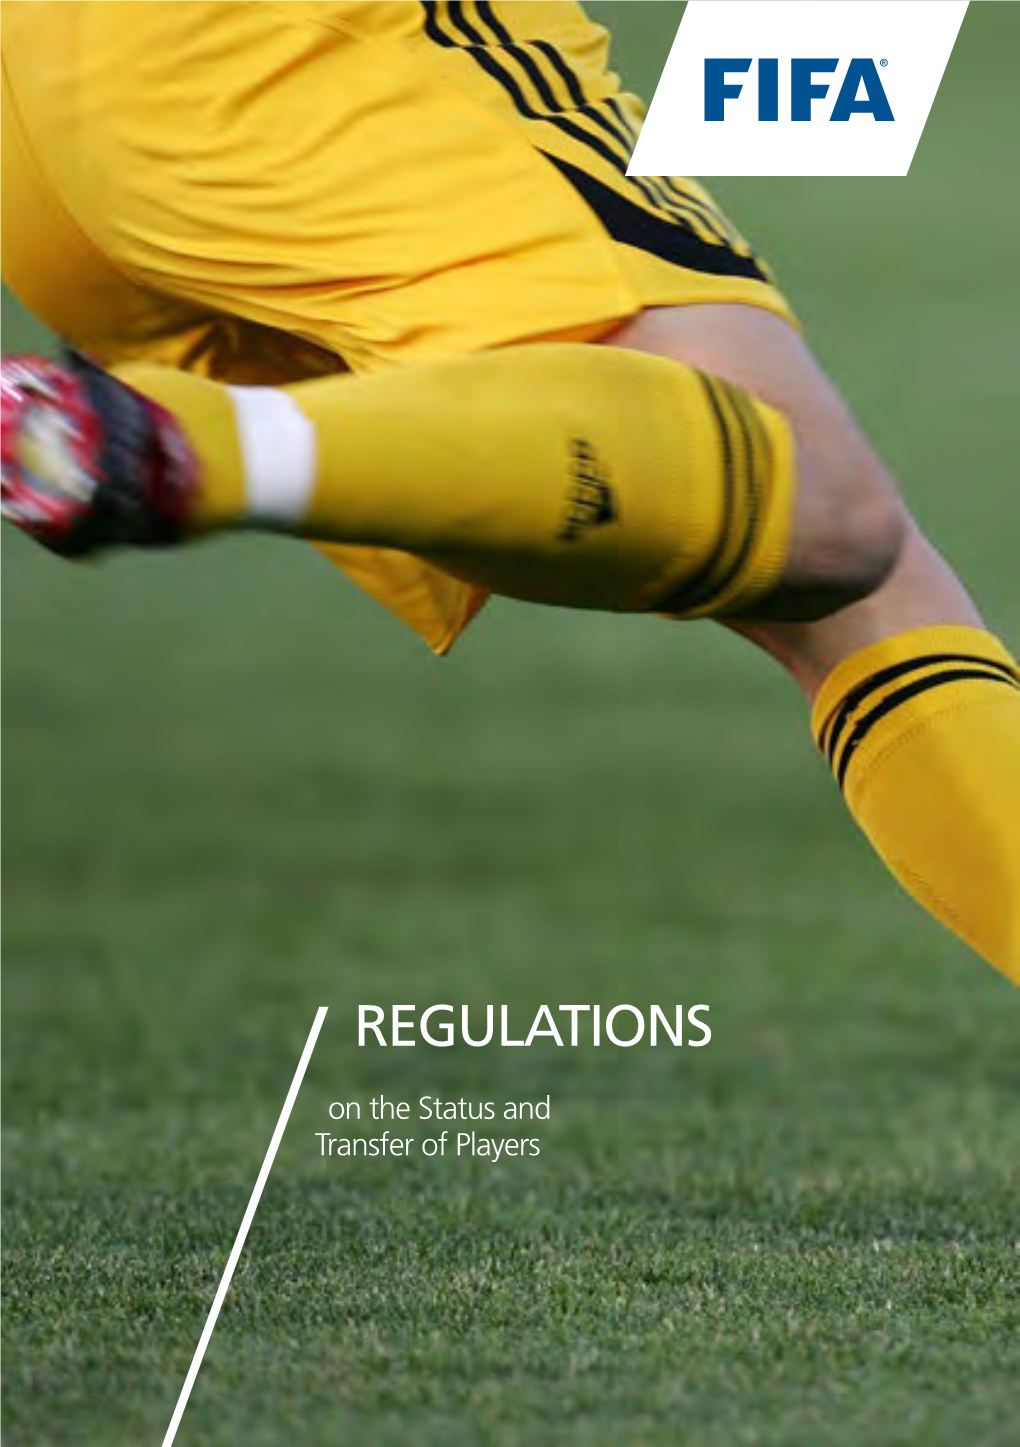 FIFA Regulations for the Status and Transfer of Players